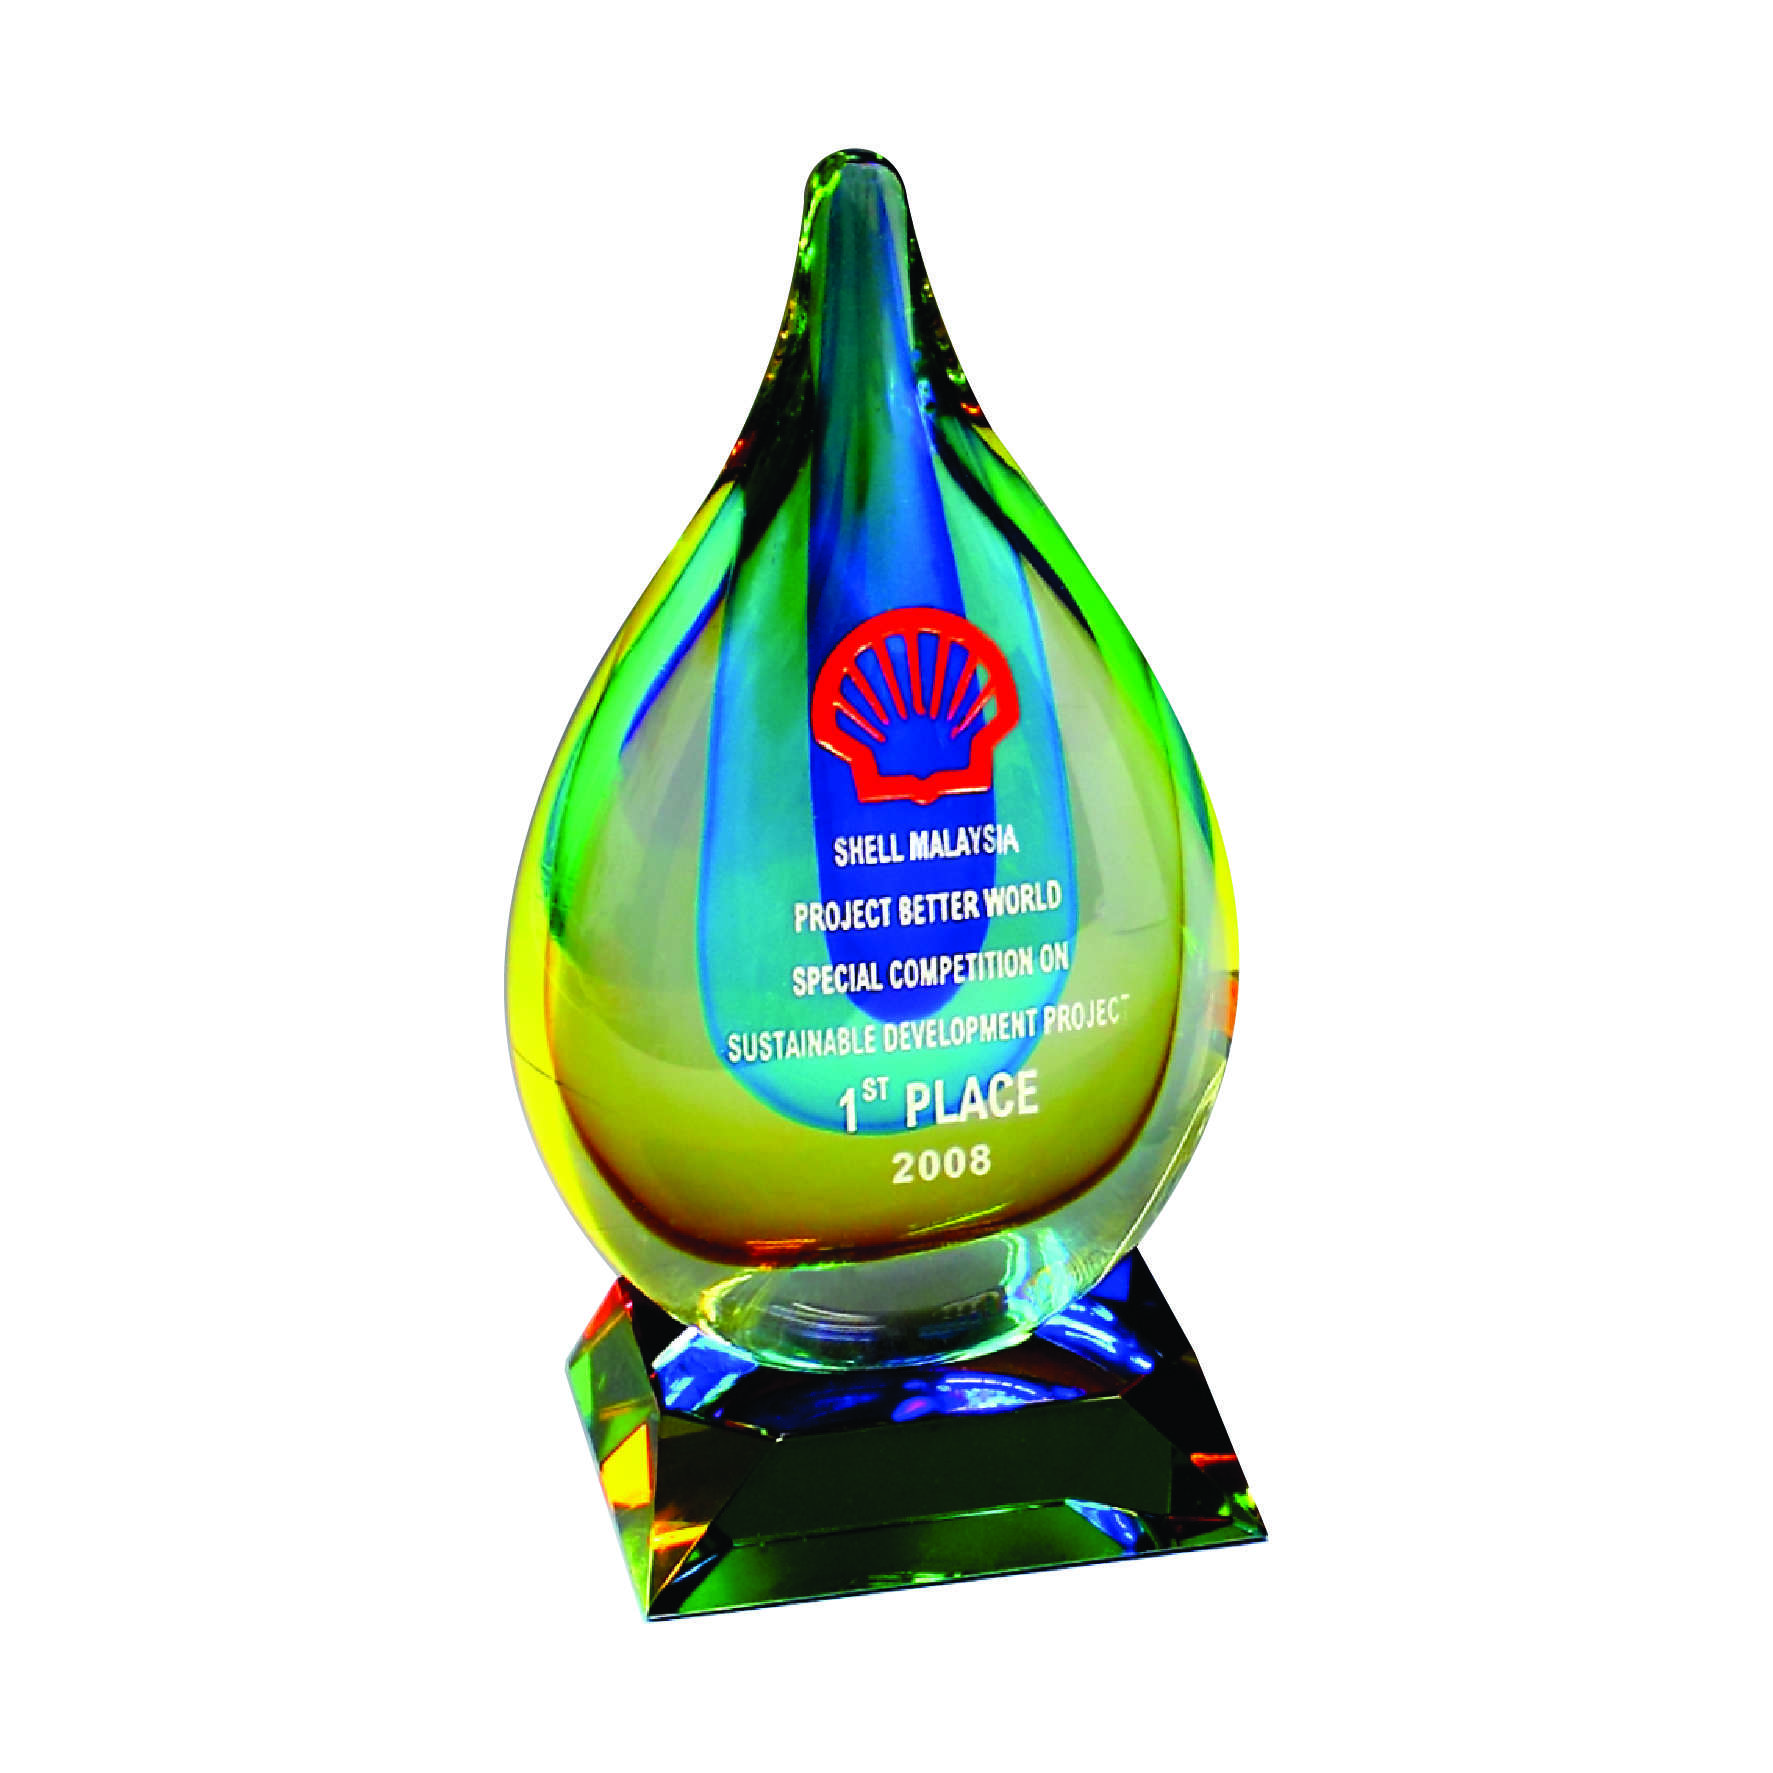 Fusion Colour Crystal Award at Clazz Trophy Malaysia | Trusted Trophy Supplier Malaysia